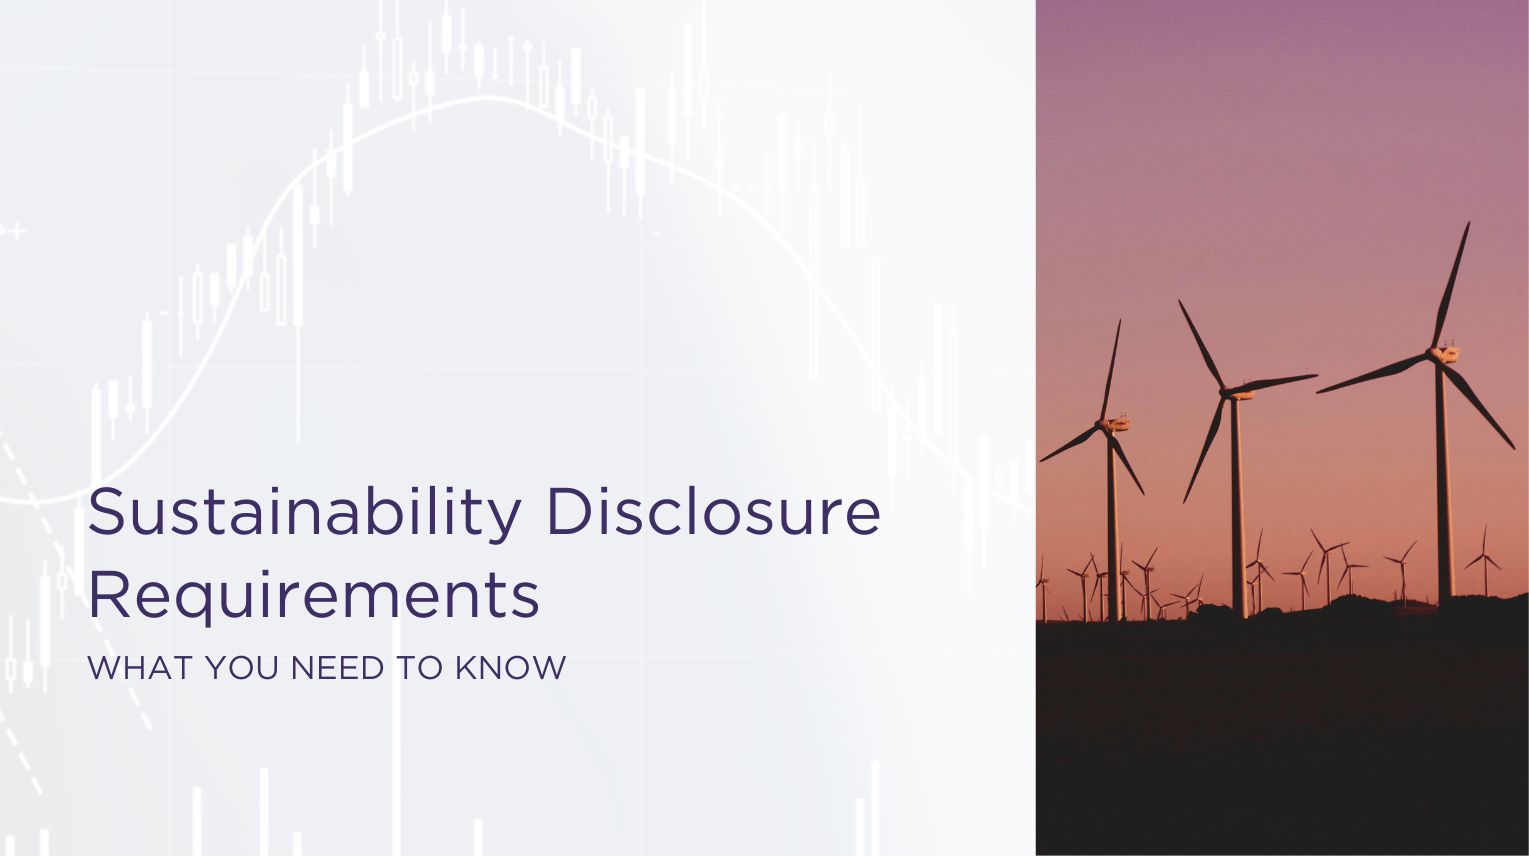 Sustainability Disclosure Requirements: What You Need to Know